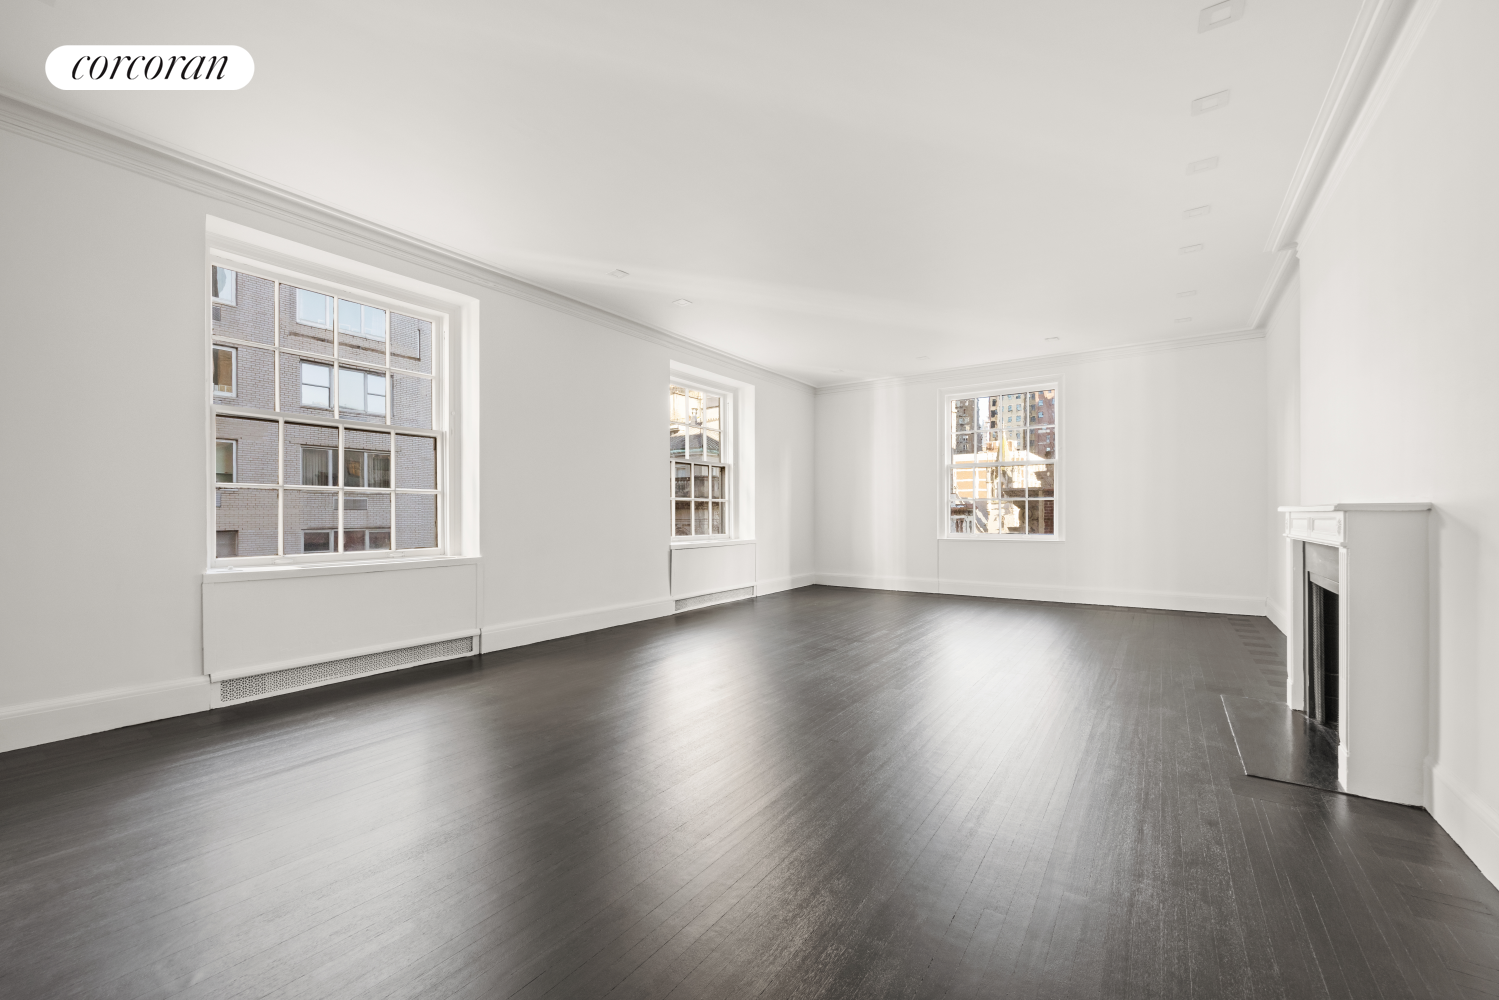 920 5th Avenue 5B, Lenox Hill, Upper East Side, NYC - 4 Bedrooms  
4 Bathrooms  
10 Rooms - 